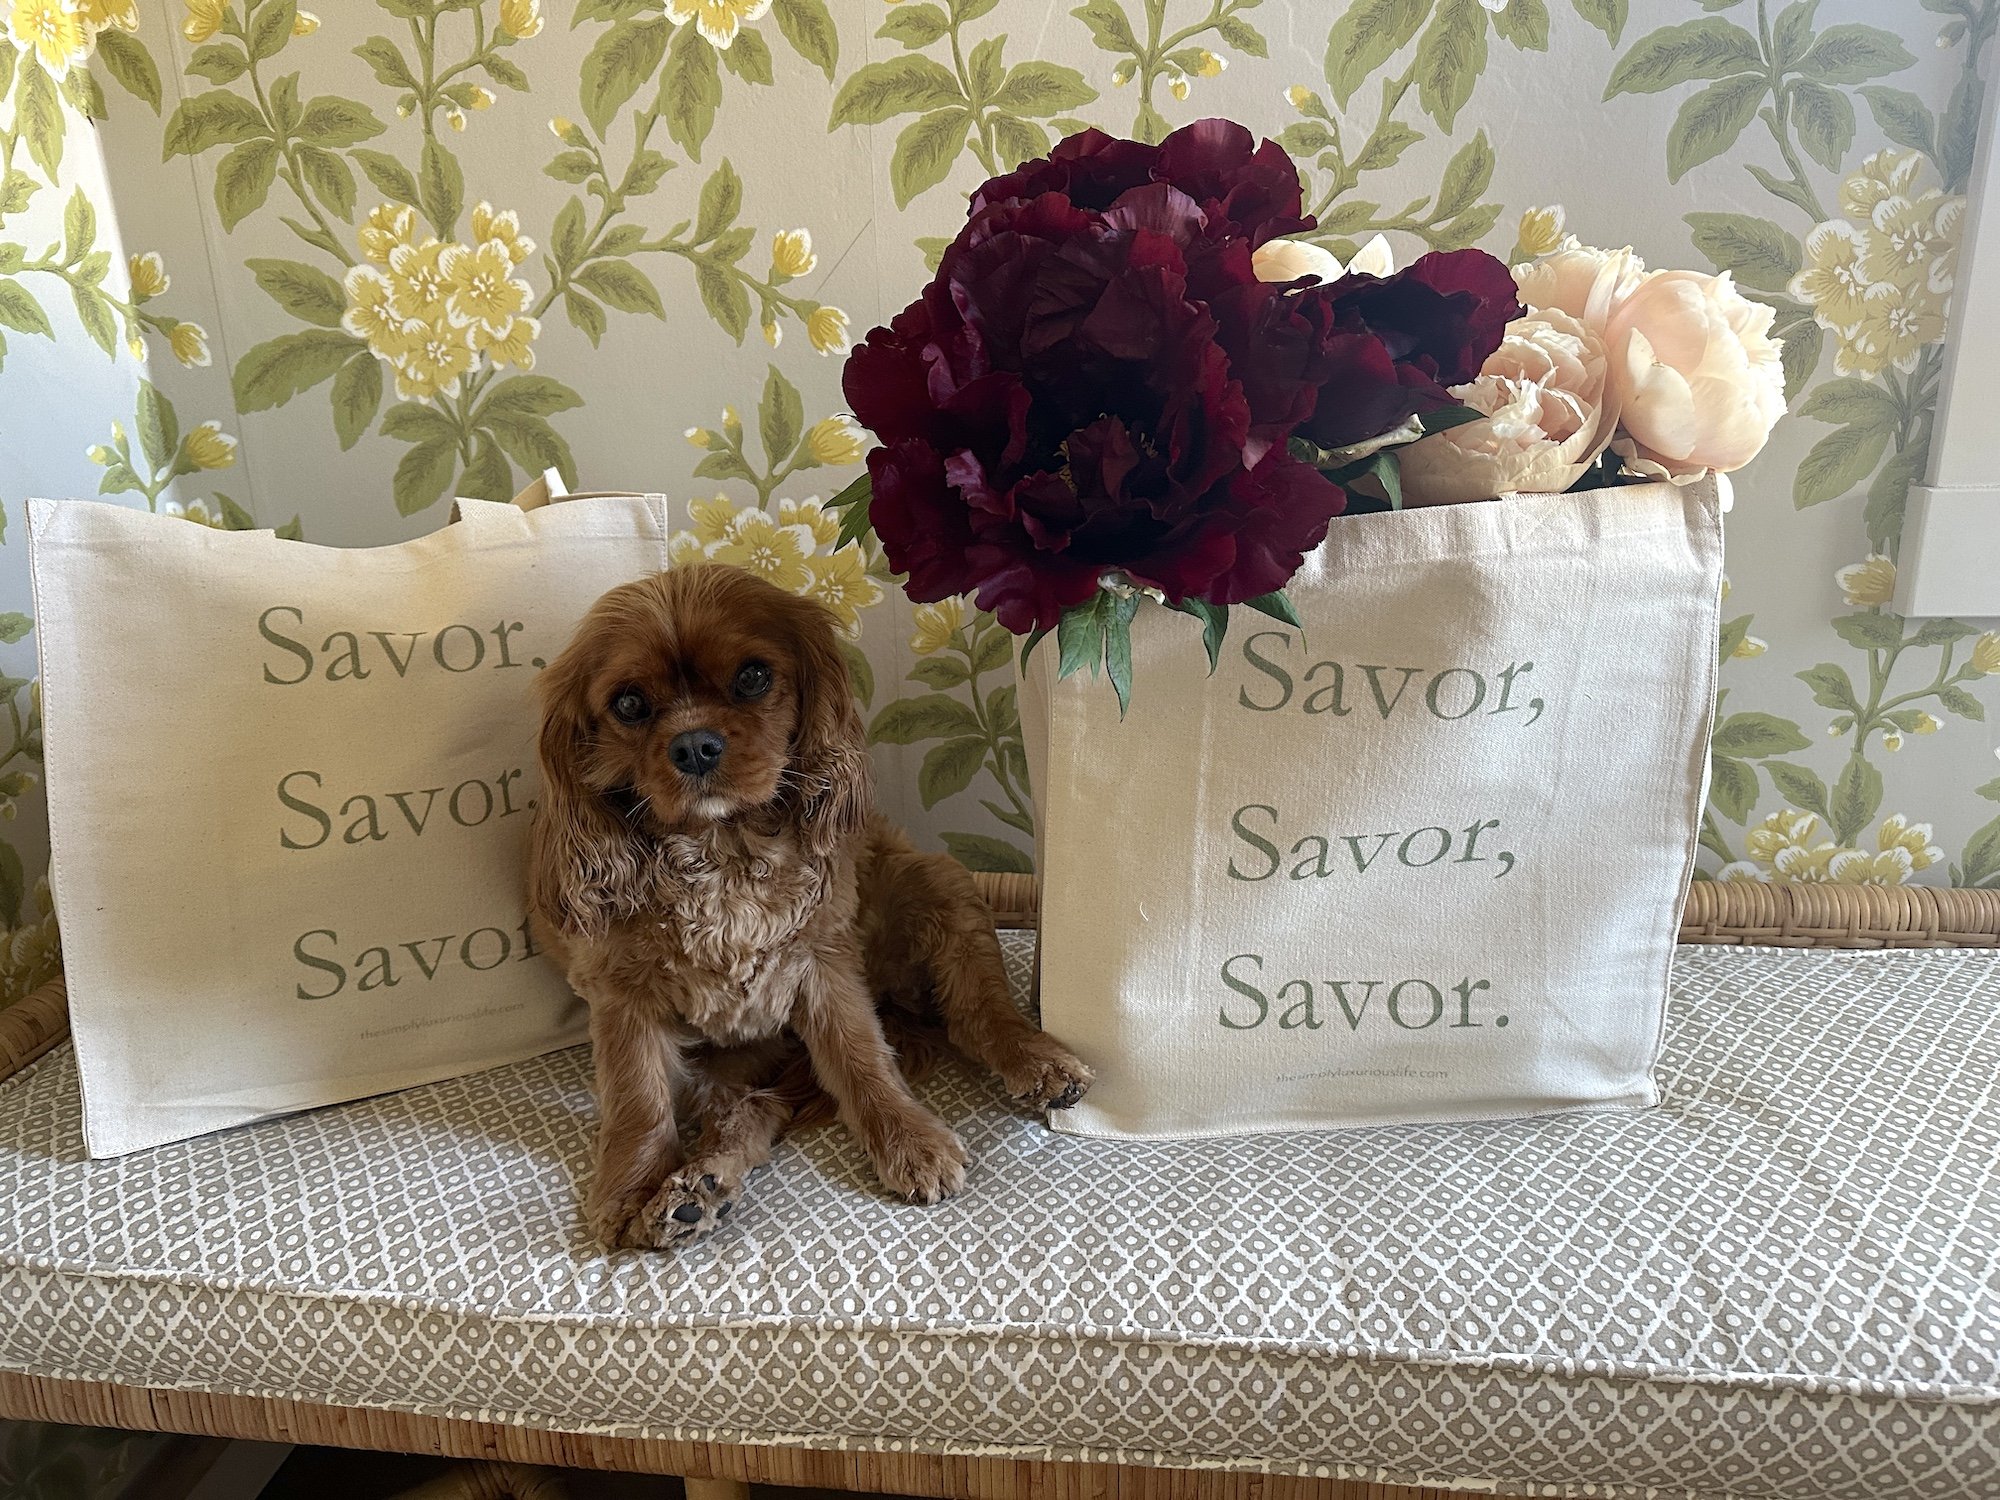 Share a Review & Purchase Your Exclusive Canvas Savor, Savor, Savor. Tote!